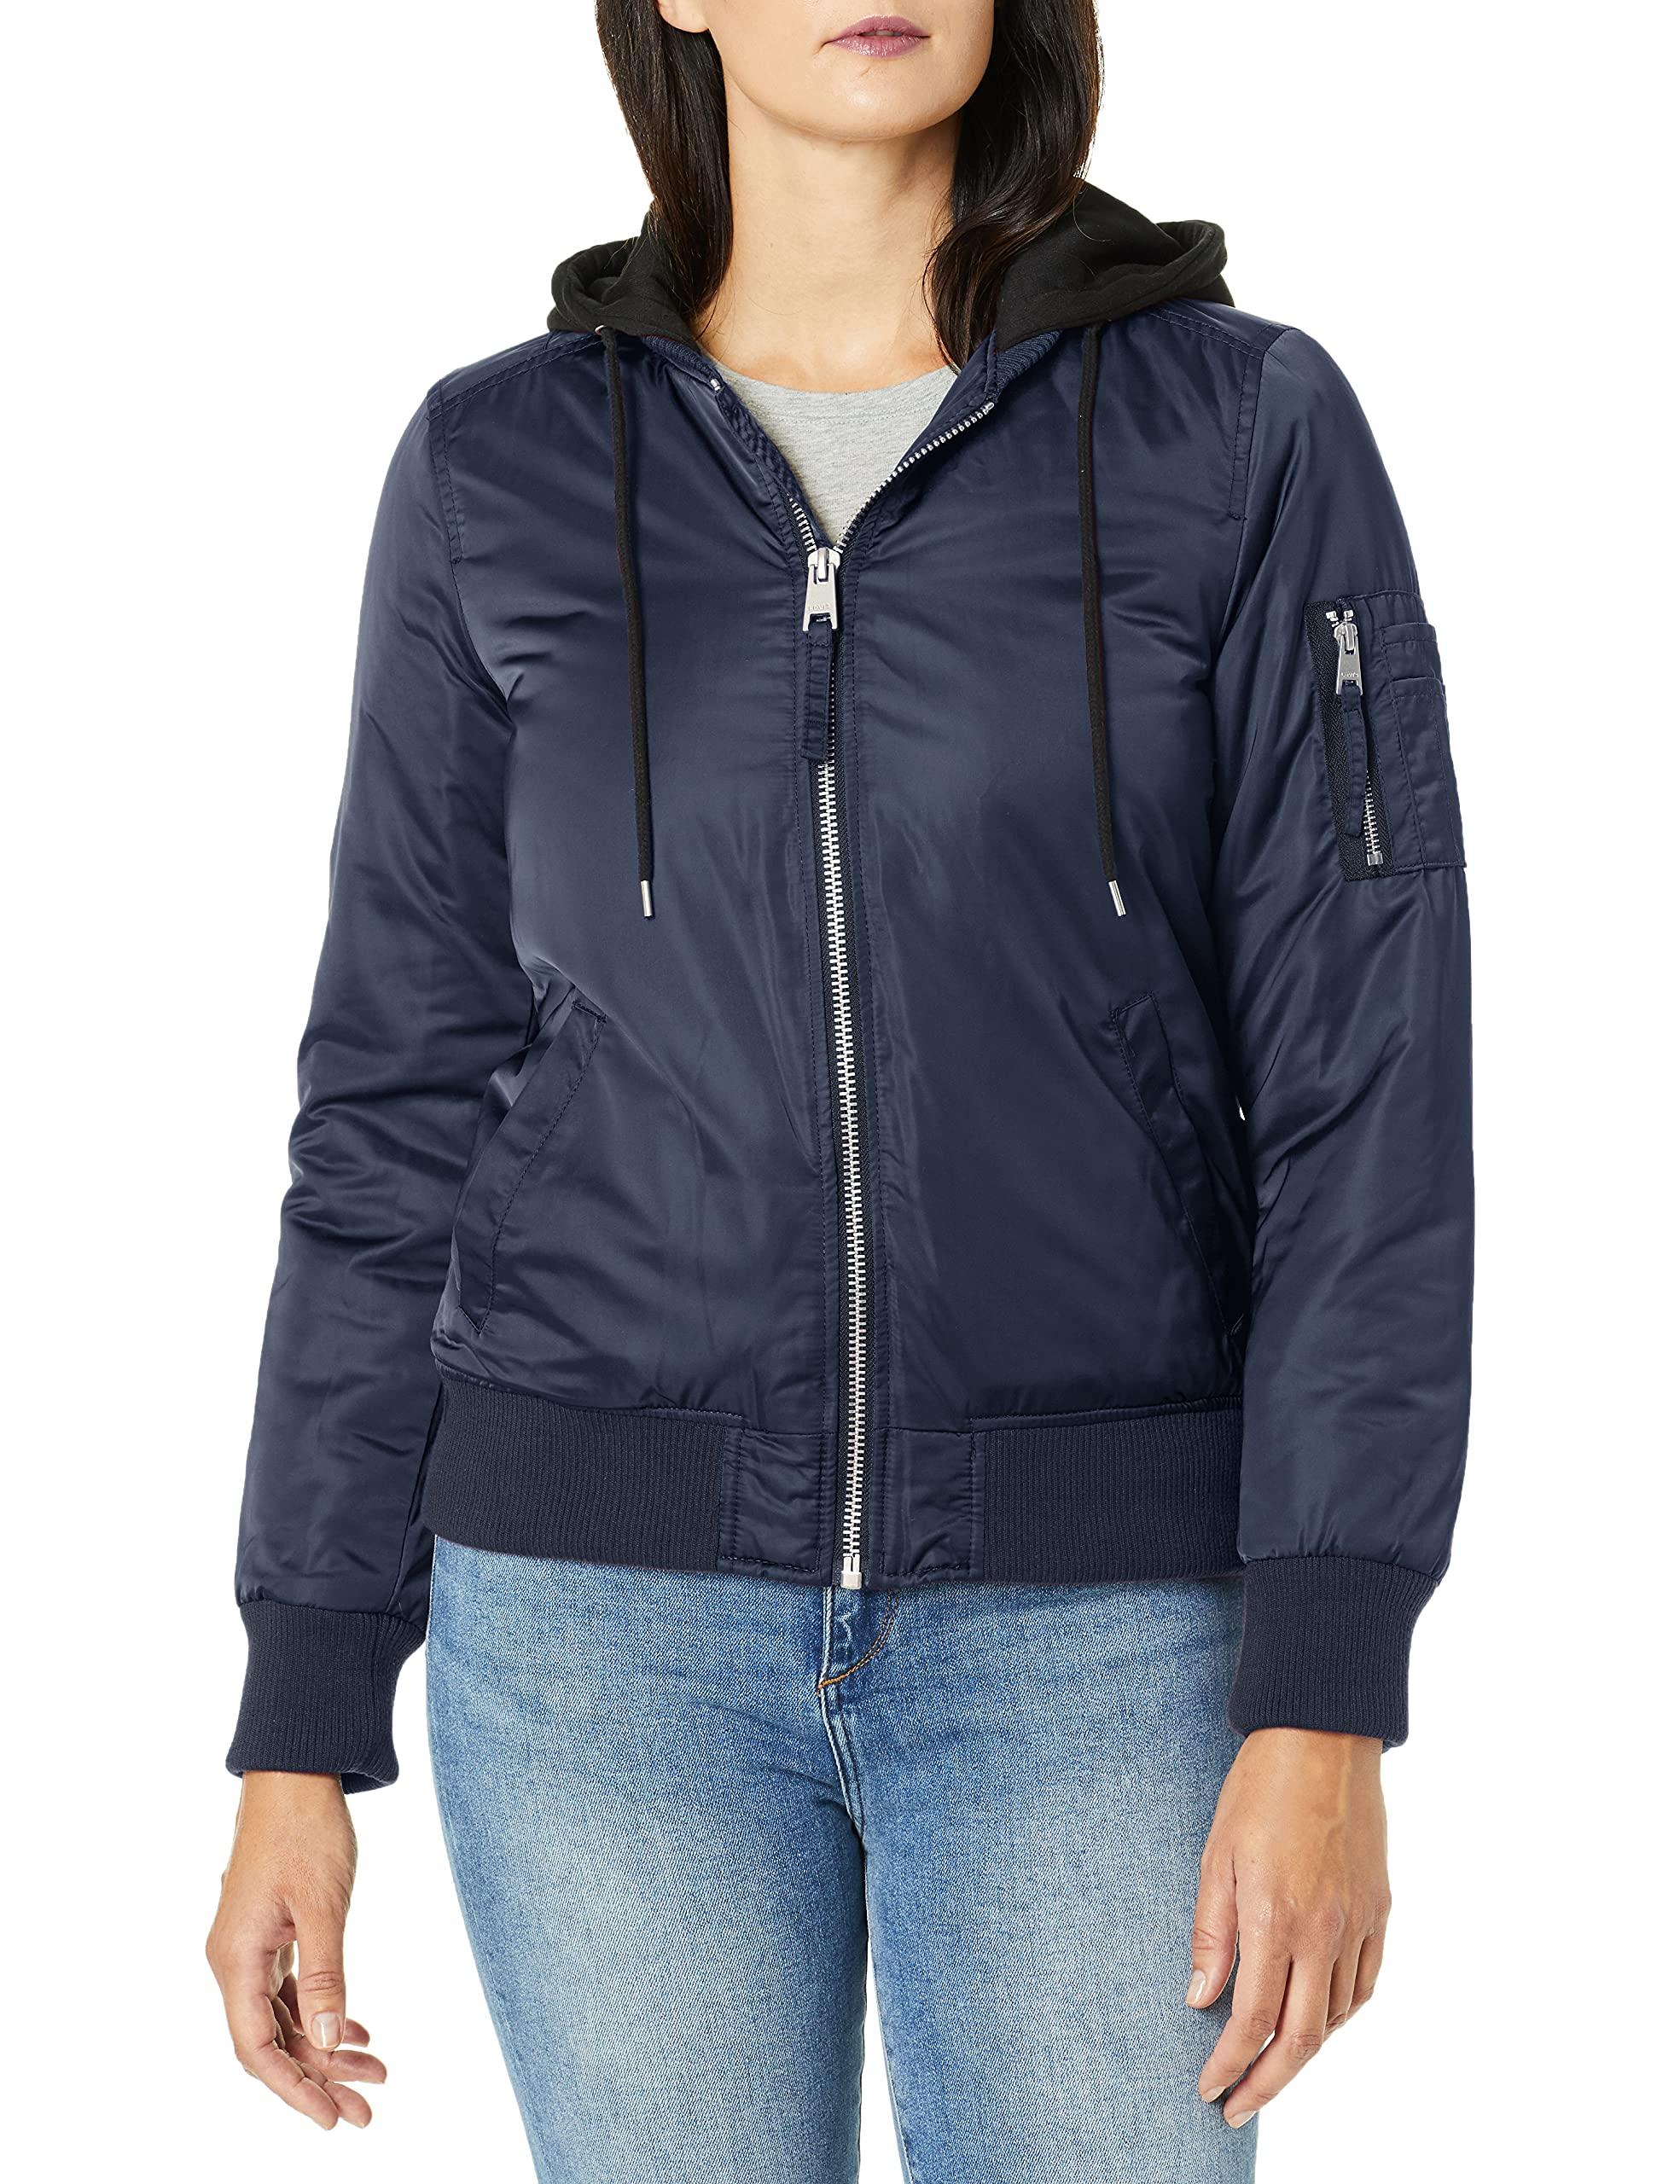 Levi's Flight Satin Bomber With Jersey Hood in Navy (Blue) - Lyst